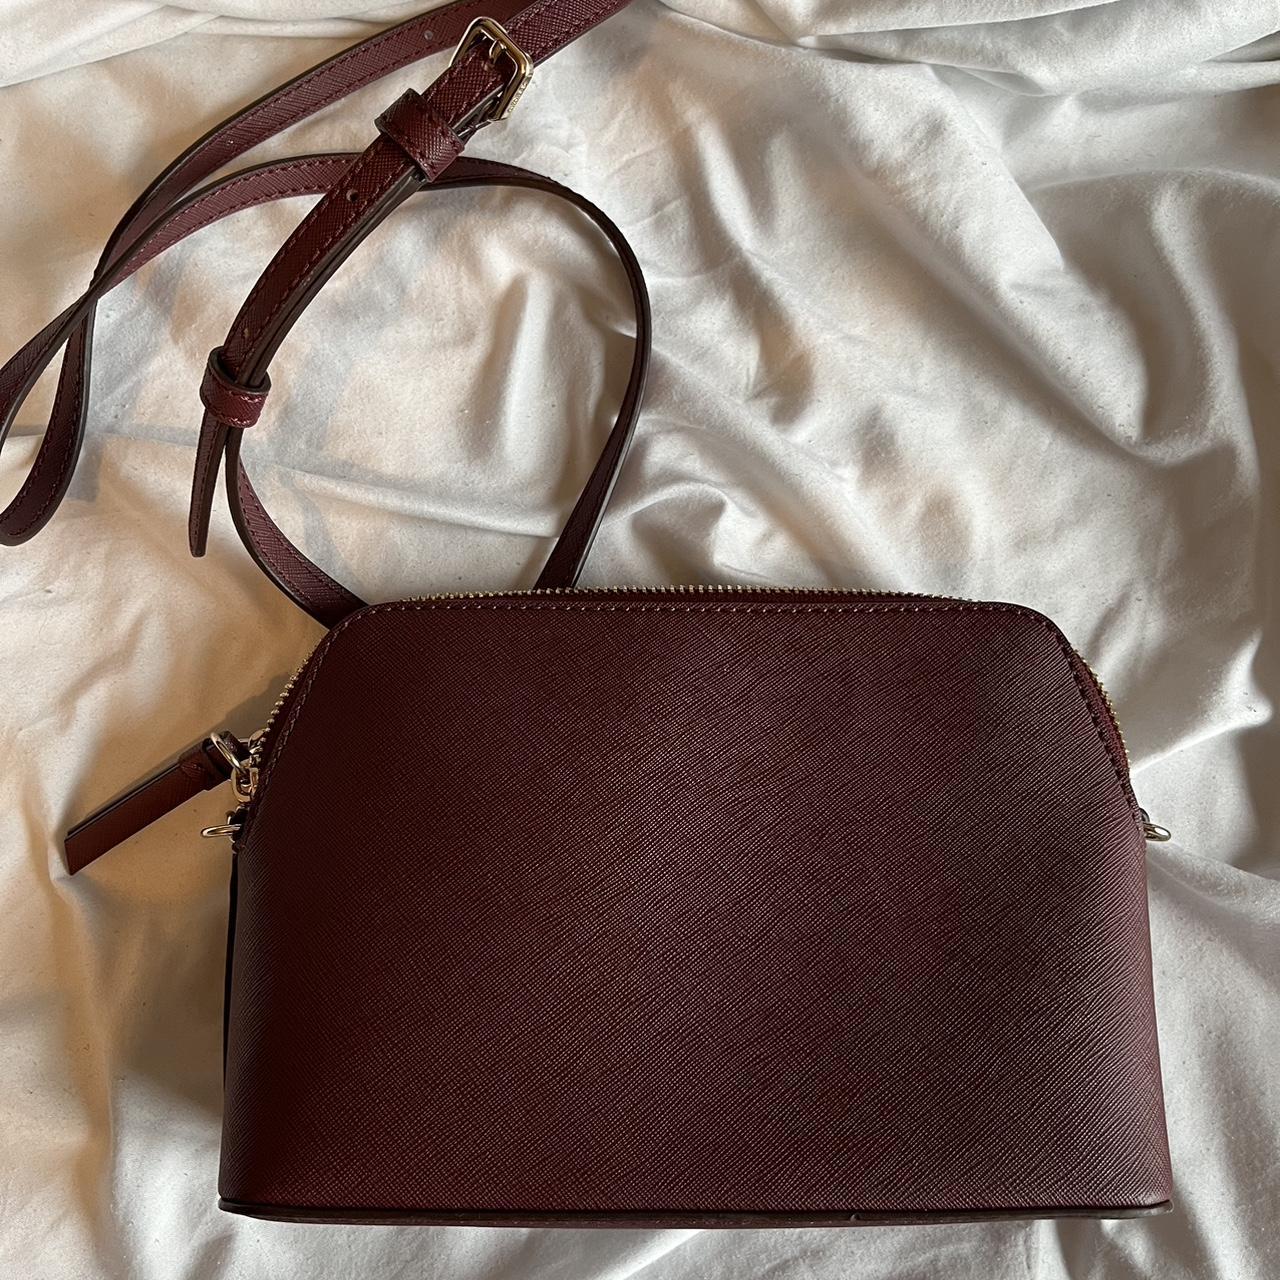 DKNY Women's Burgundy and Gold Bag (2)